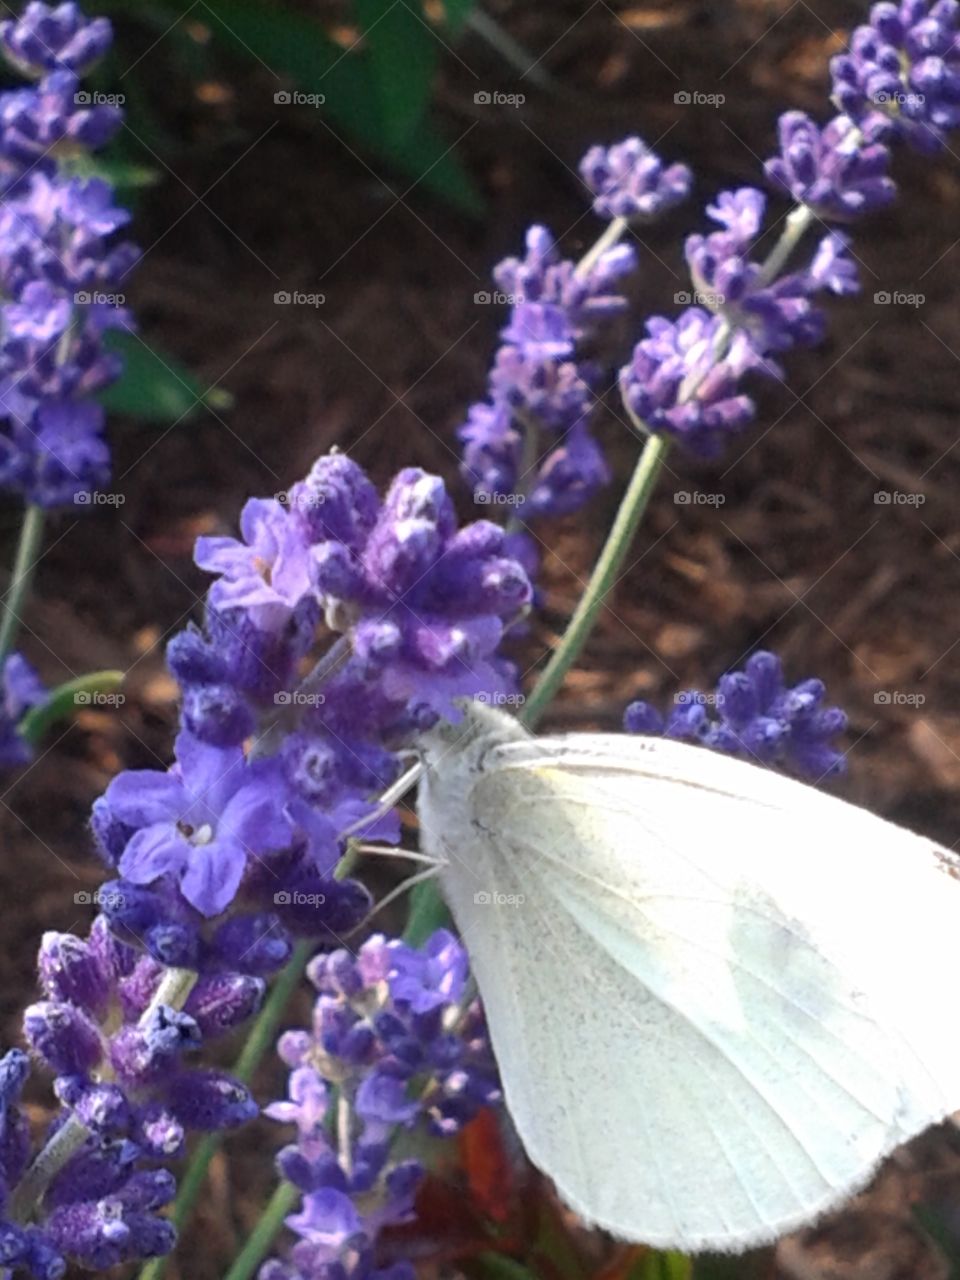 Tasting the Lavender. This simple but sweet butterfly stopped by to taste the Lavender  nectar.